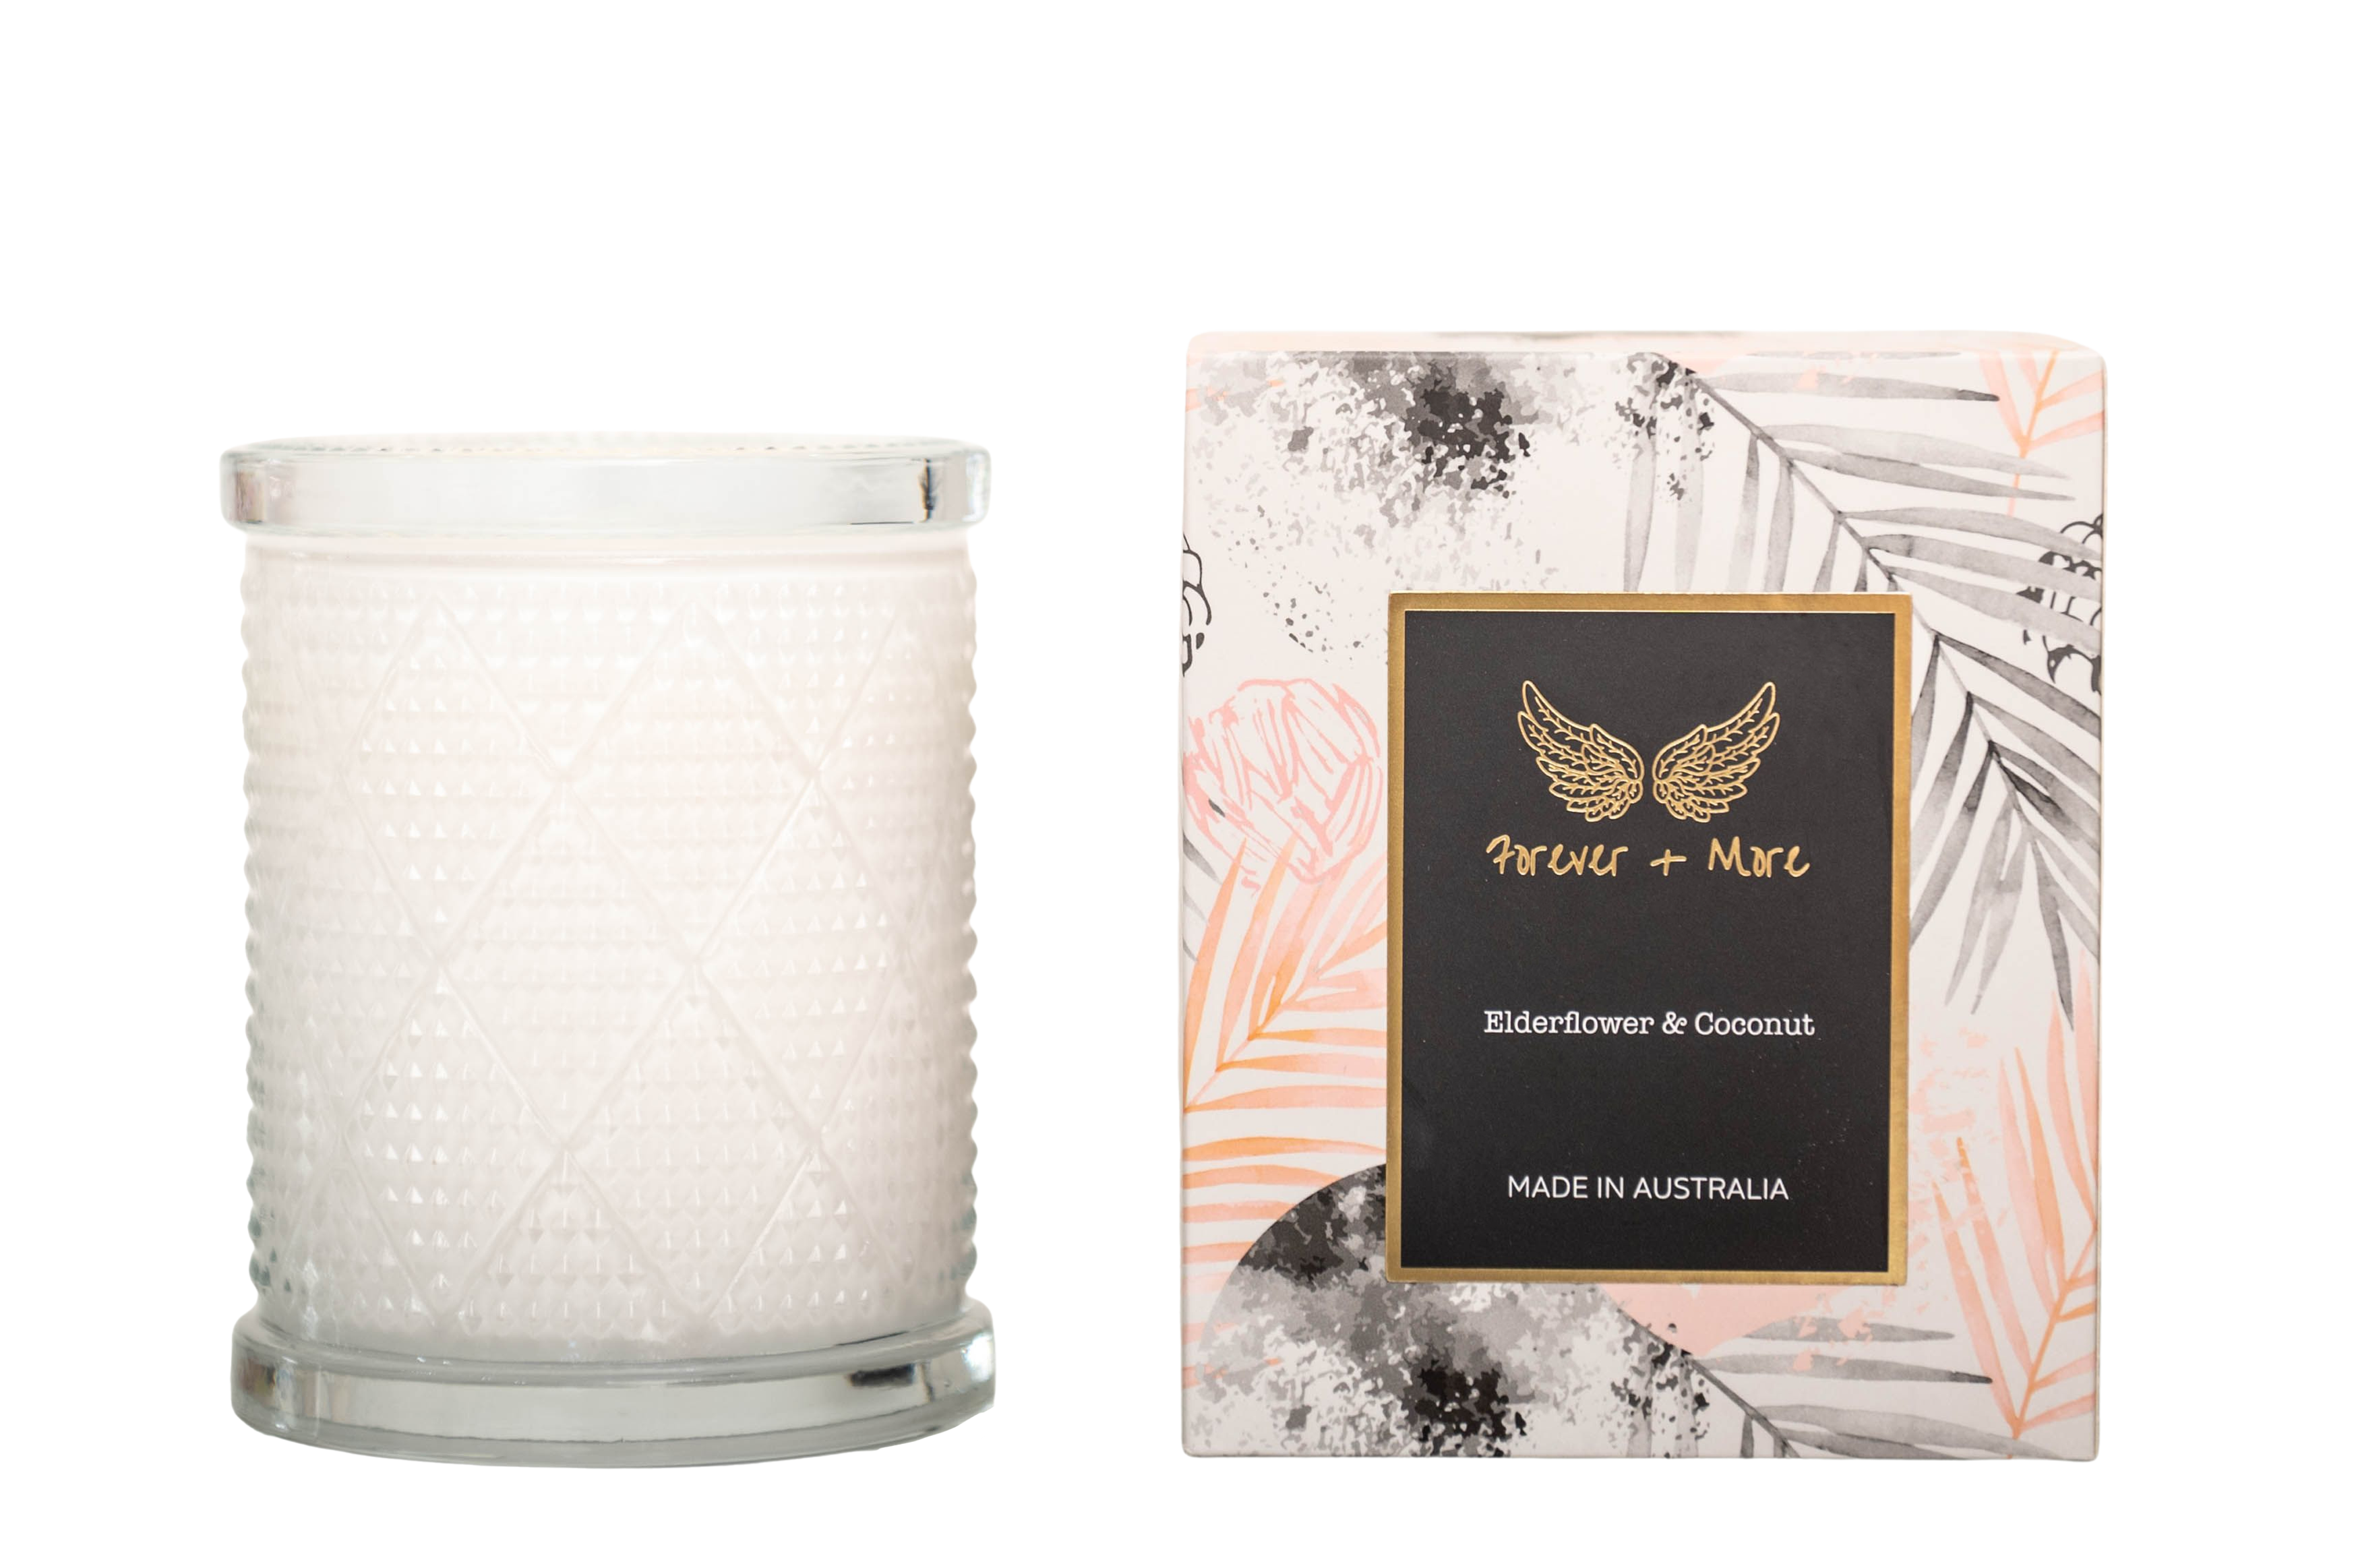 Elderflower and Coconut Soy Candle